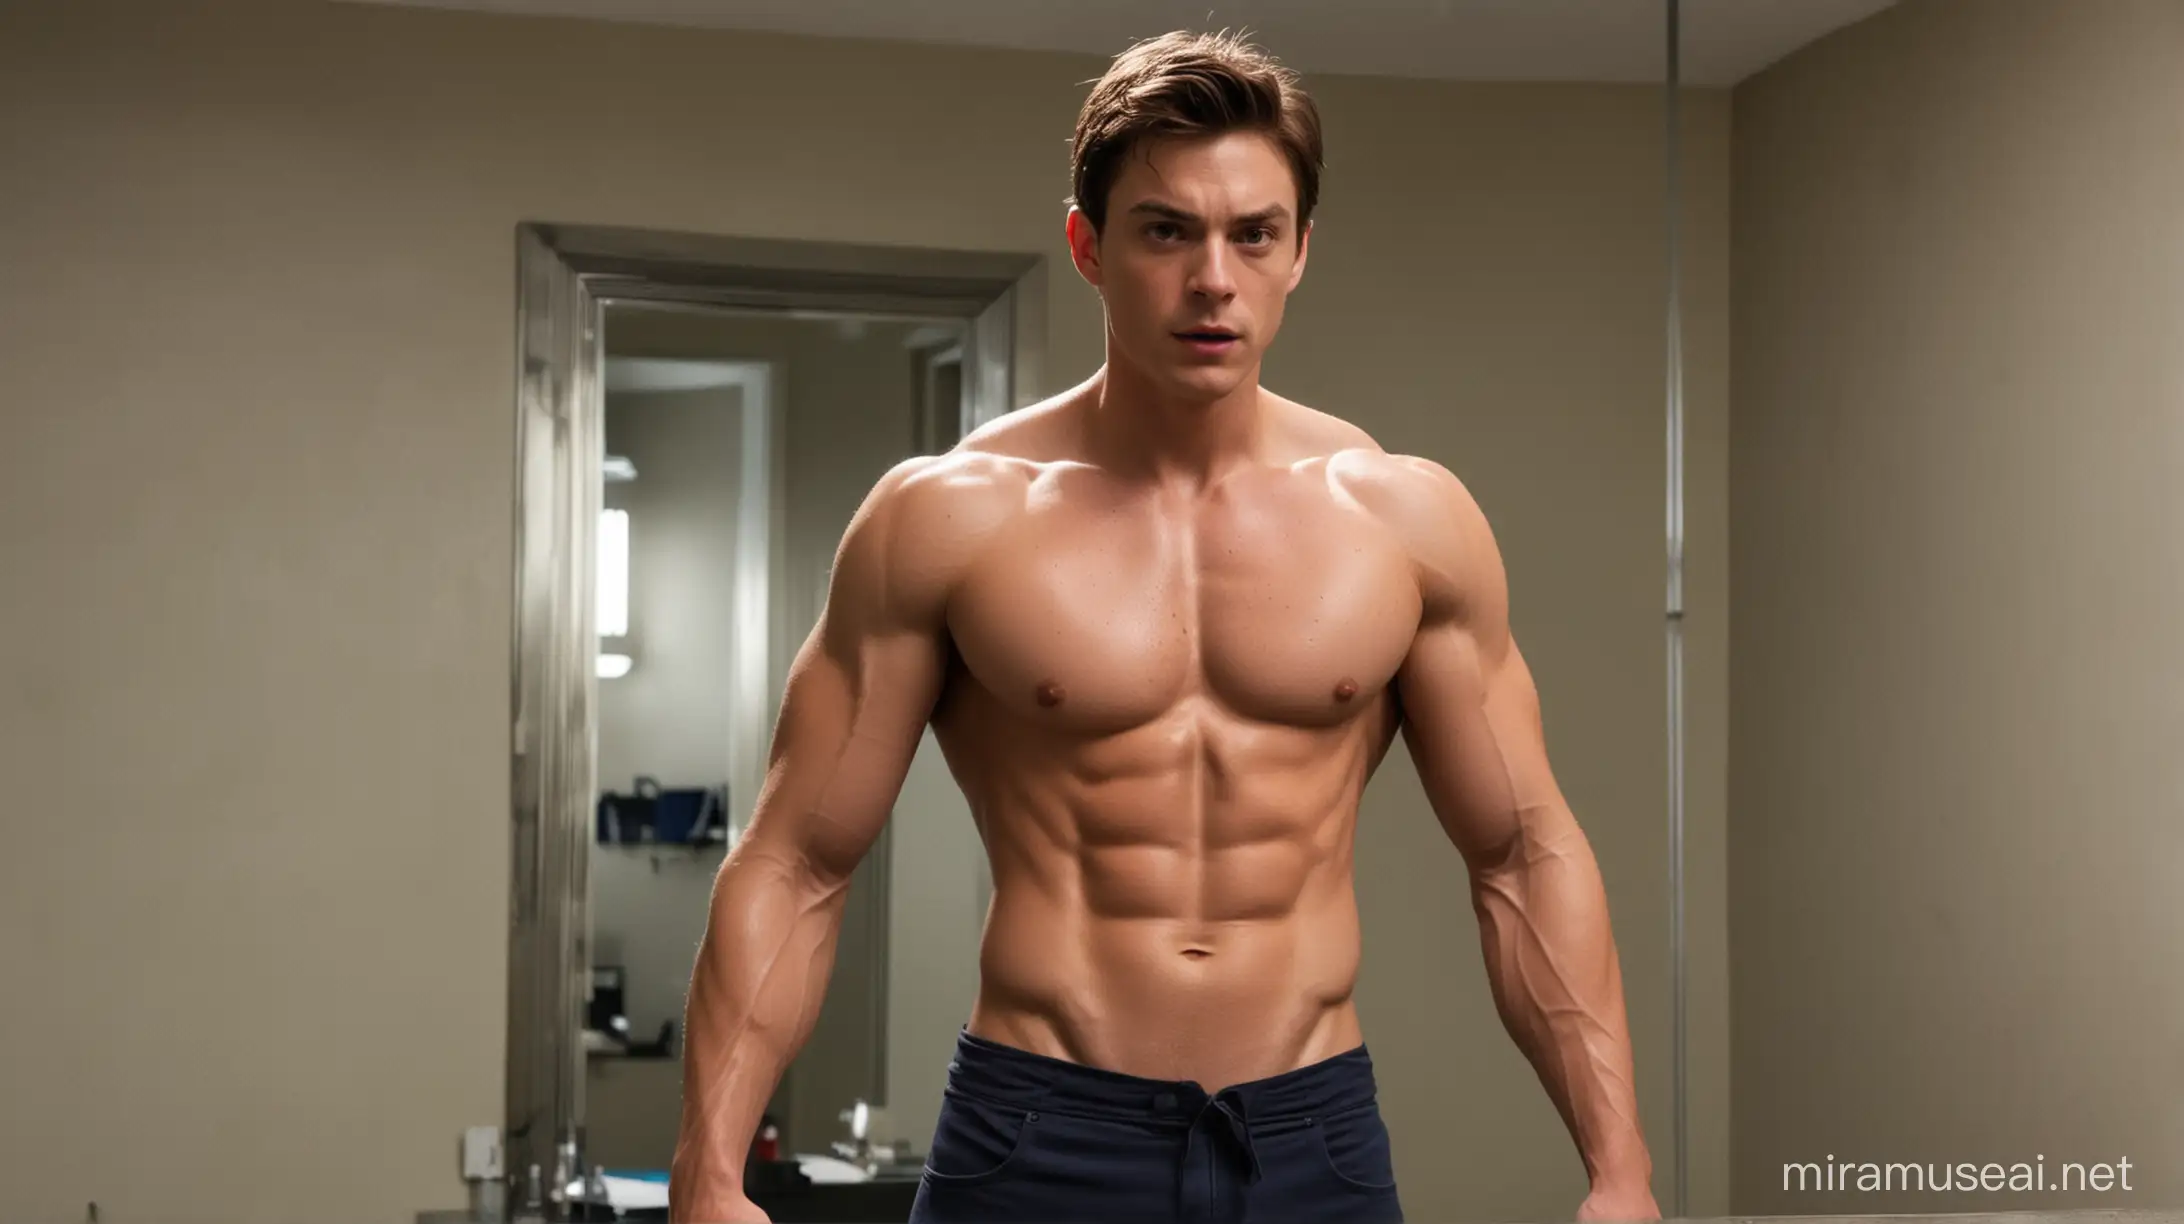 Muscular Peter Parker Poses in Bare Room with Mirror